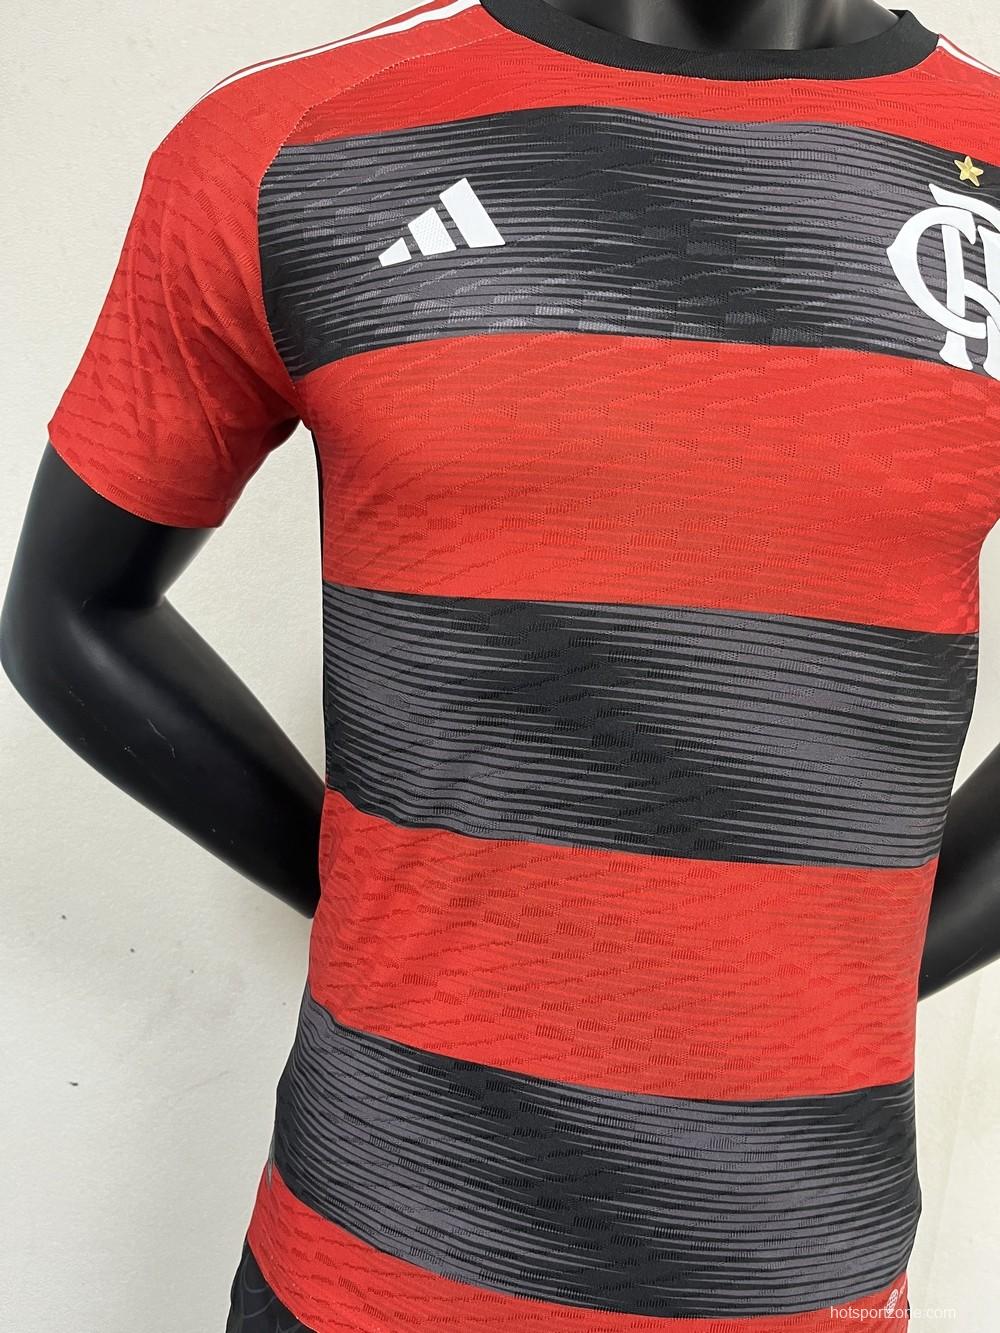 Player Version 23/24 Flamengo Home Jersey